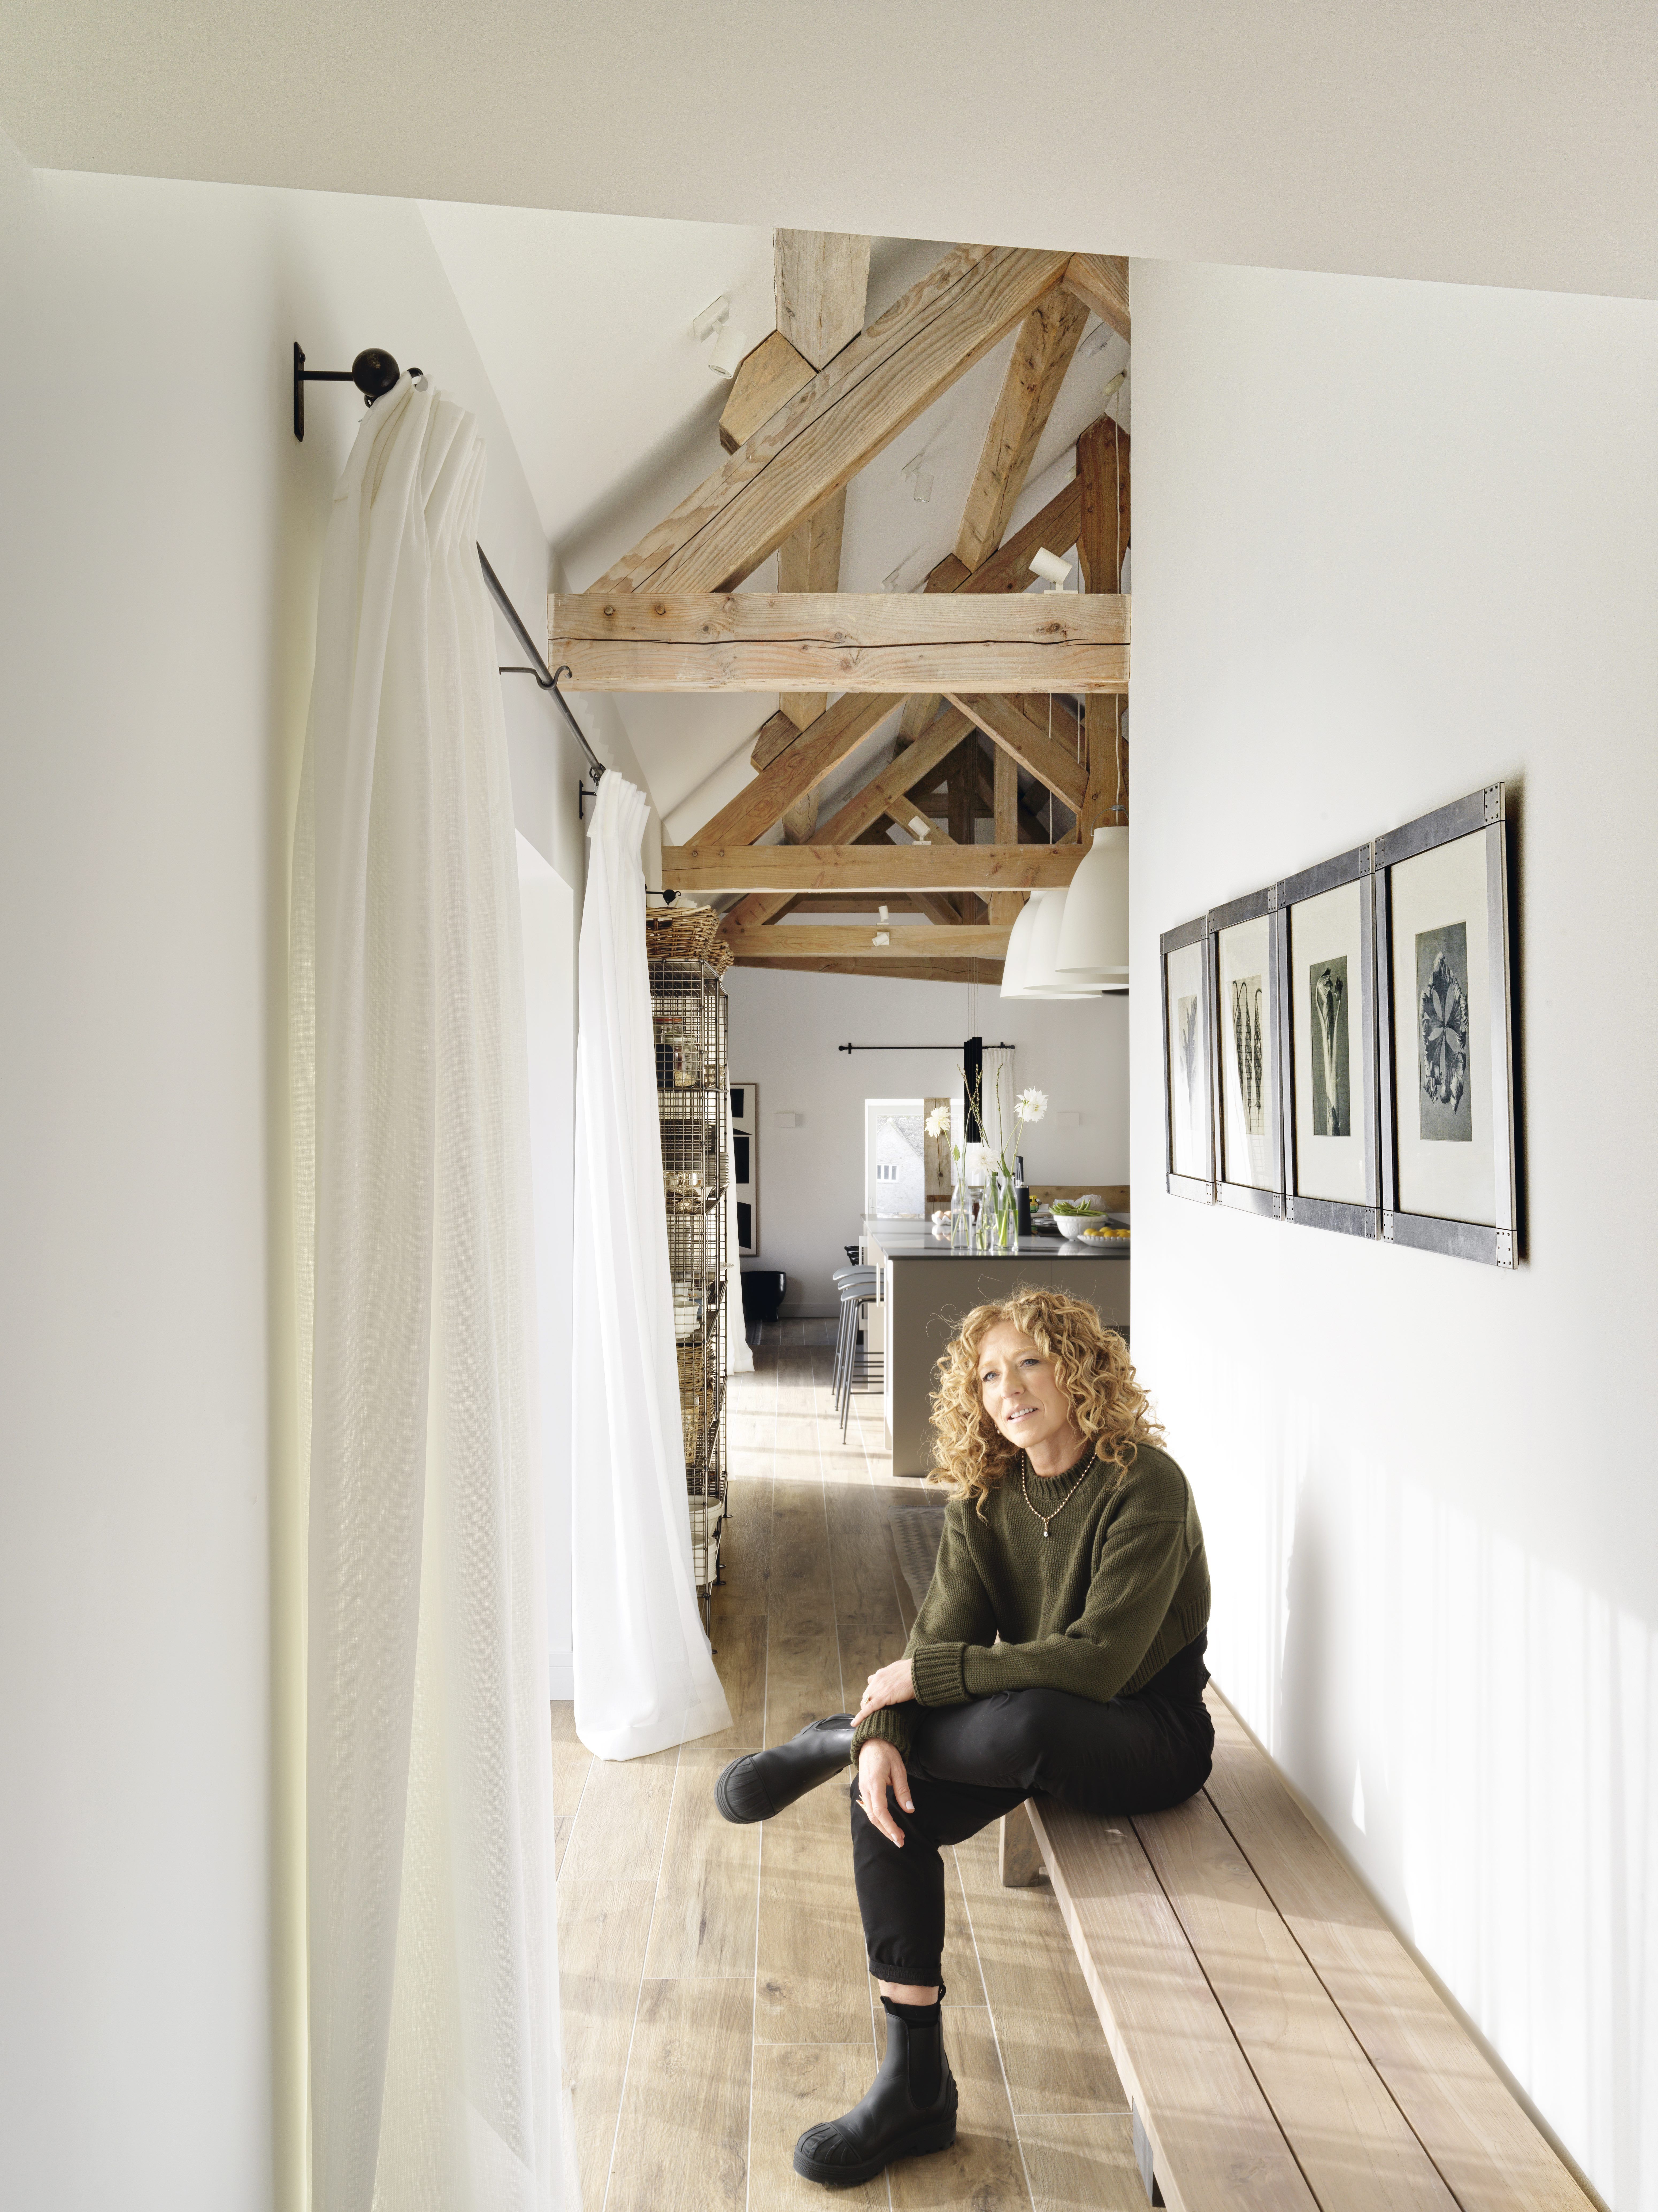 Kelly Hoppen reveals the transformation of her Cotswolds home